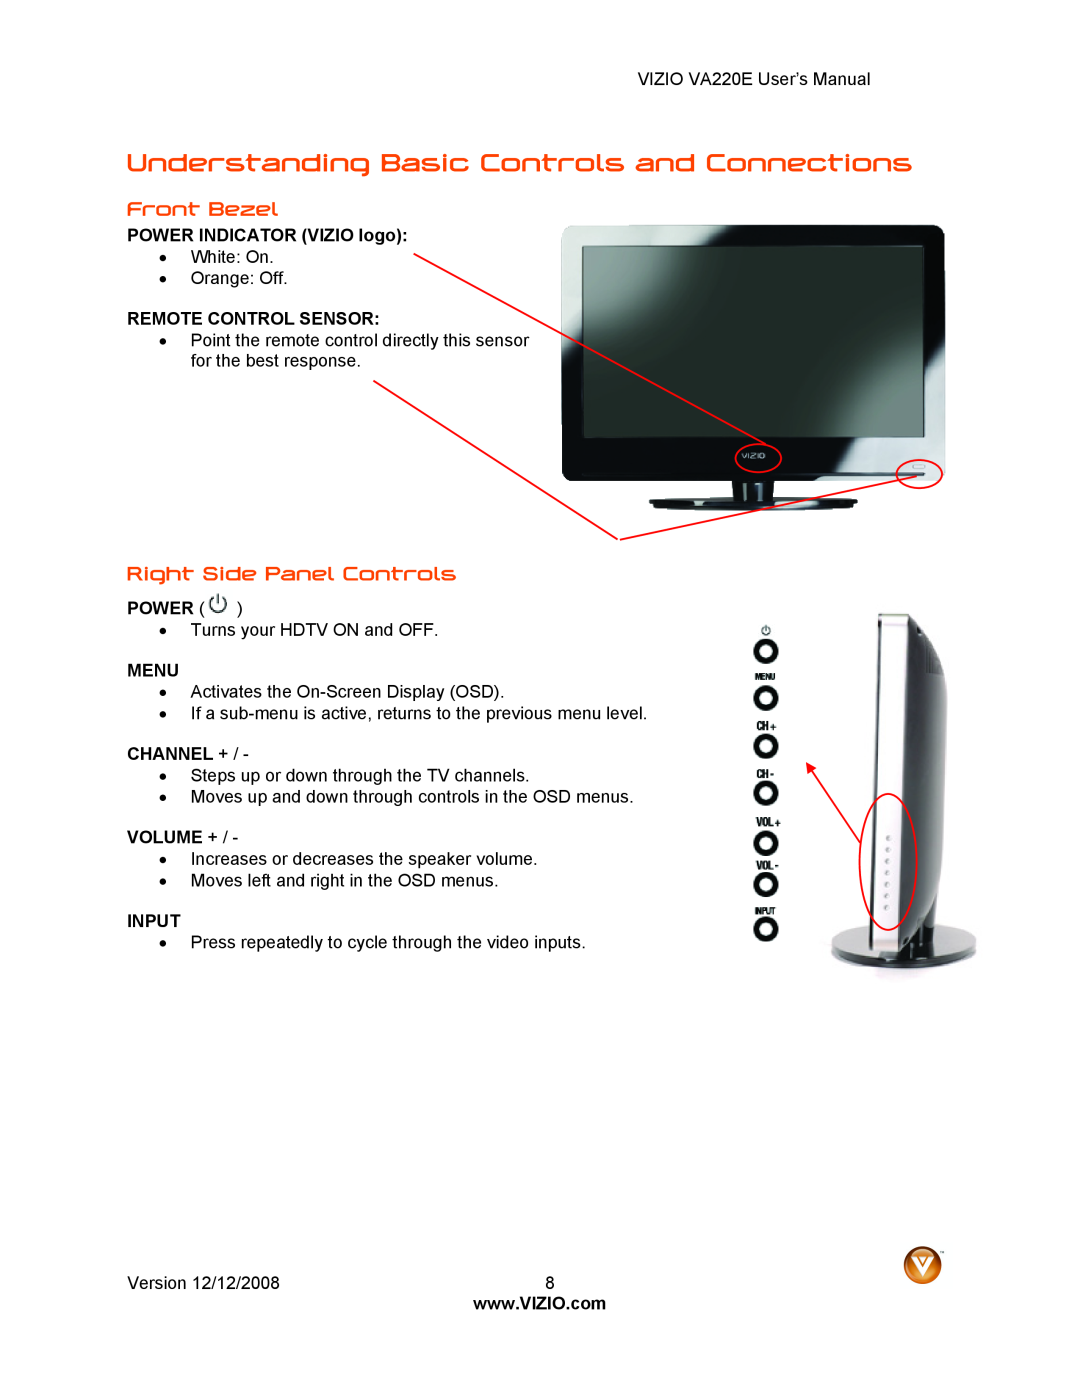 Vizio VA220E user manual Understanding Basic Controls and Connections, Front Bezel, Right Side Panel Controls 